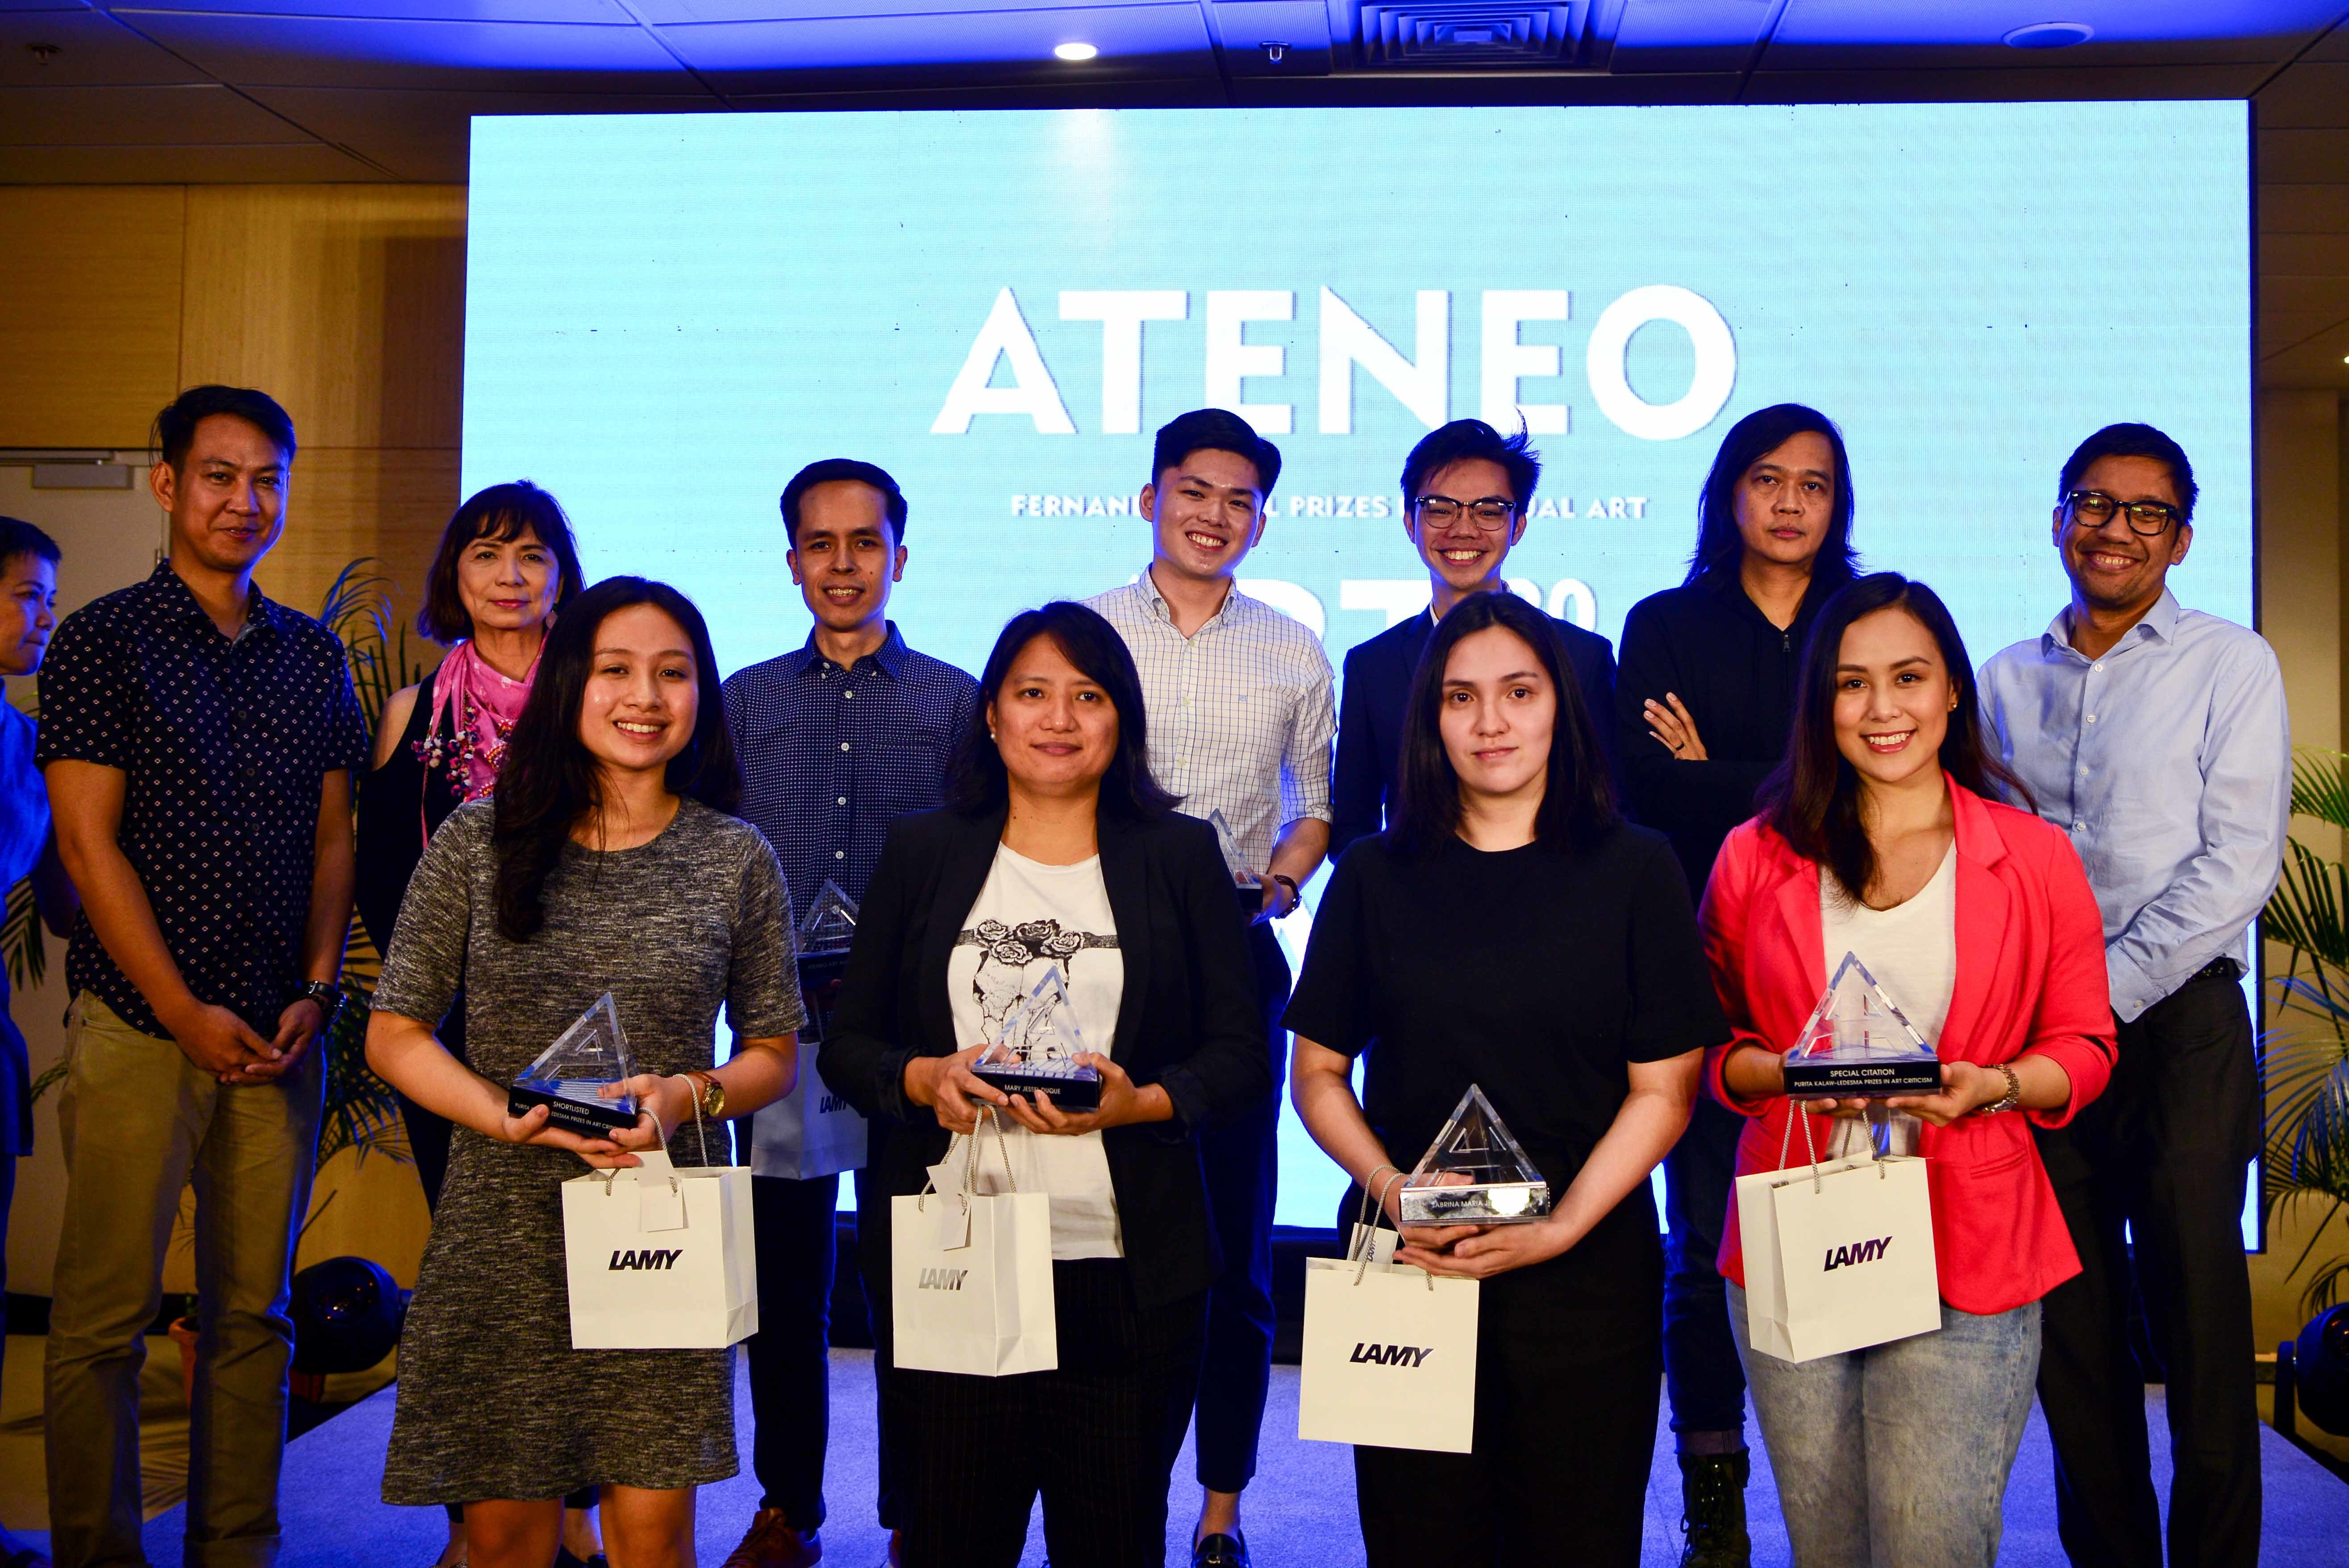 The shortlisted writers for the Ateneo Art Awards 2018 - Purita Kalaw-Ledesma Prizes in Art Criticism